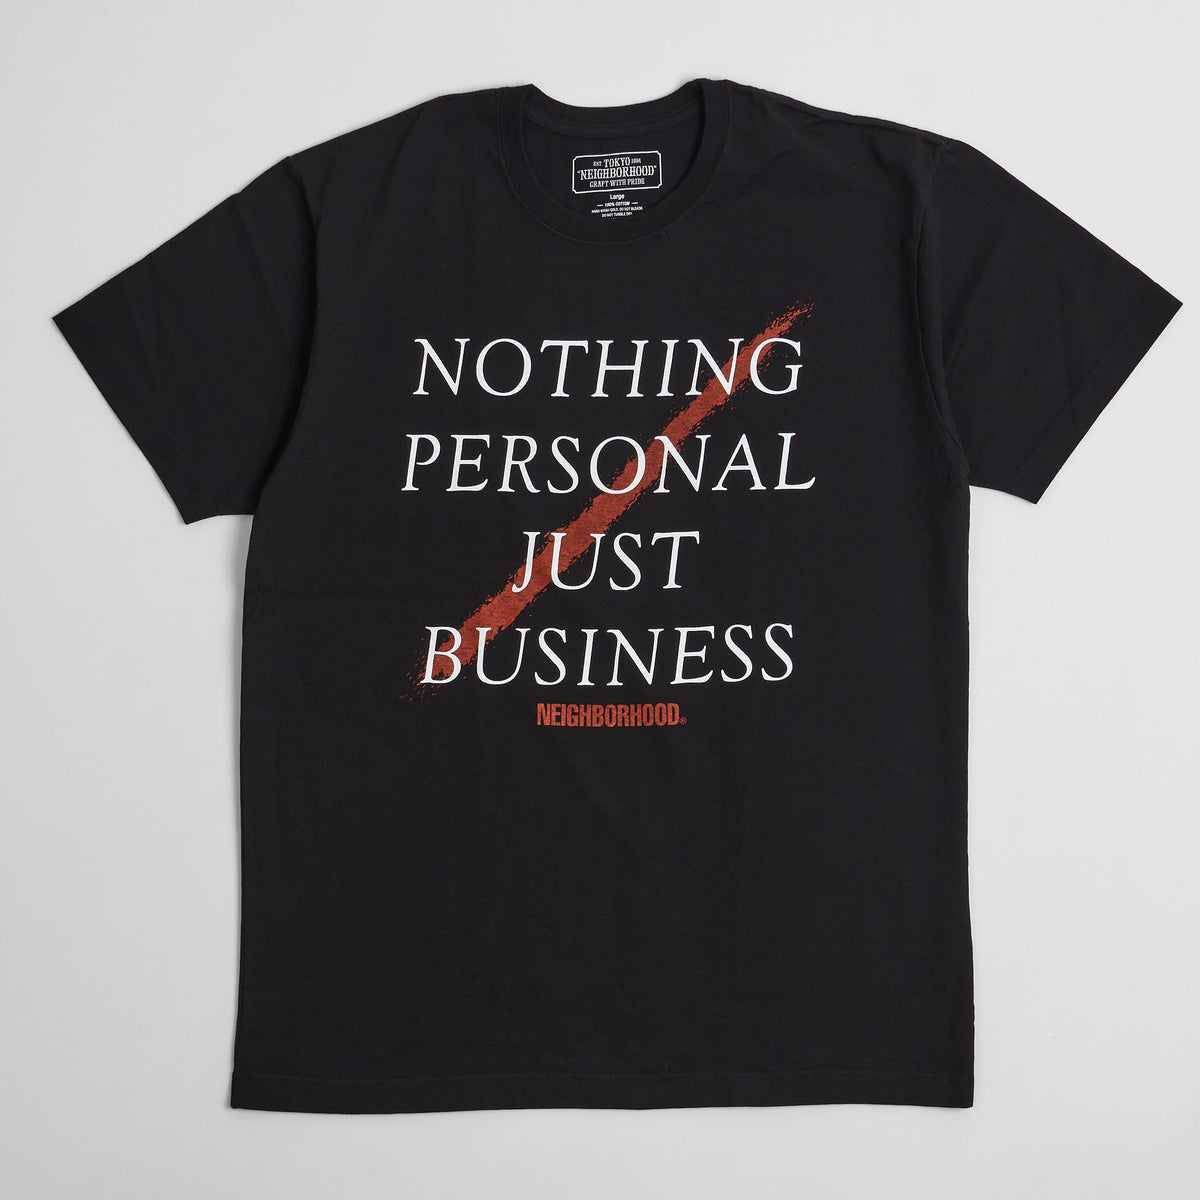 Neighborhood Printed T-Shirt Nothing Personal Just Business